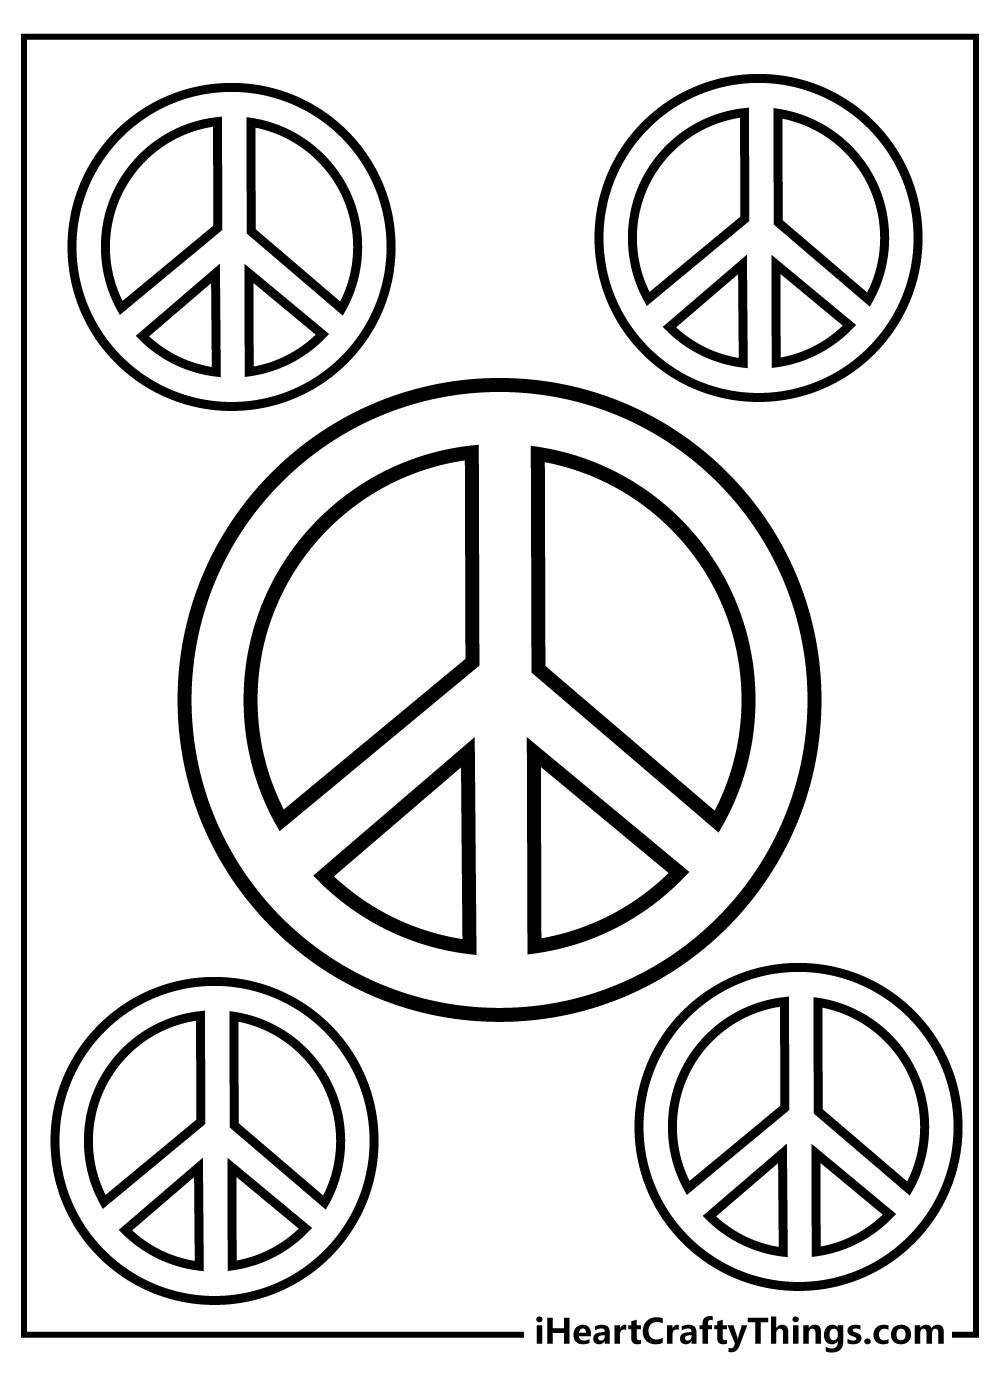 Peace coloring pages free printables